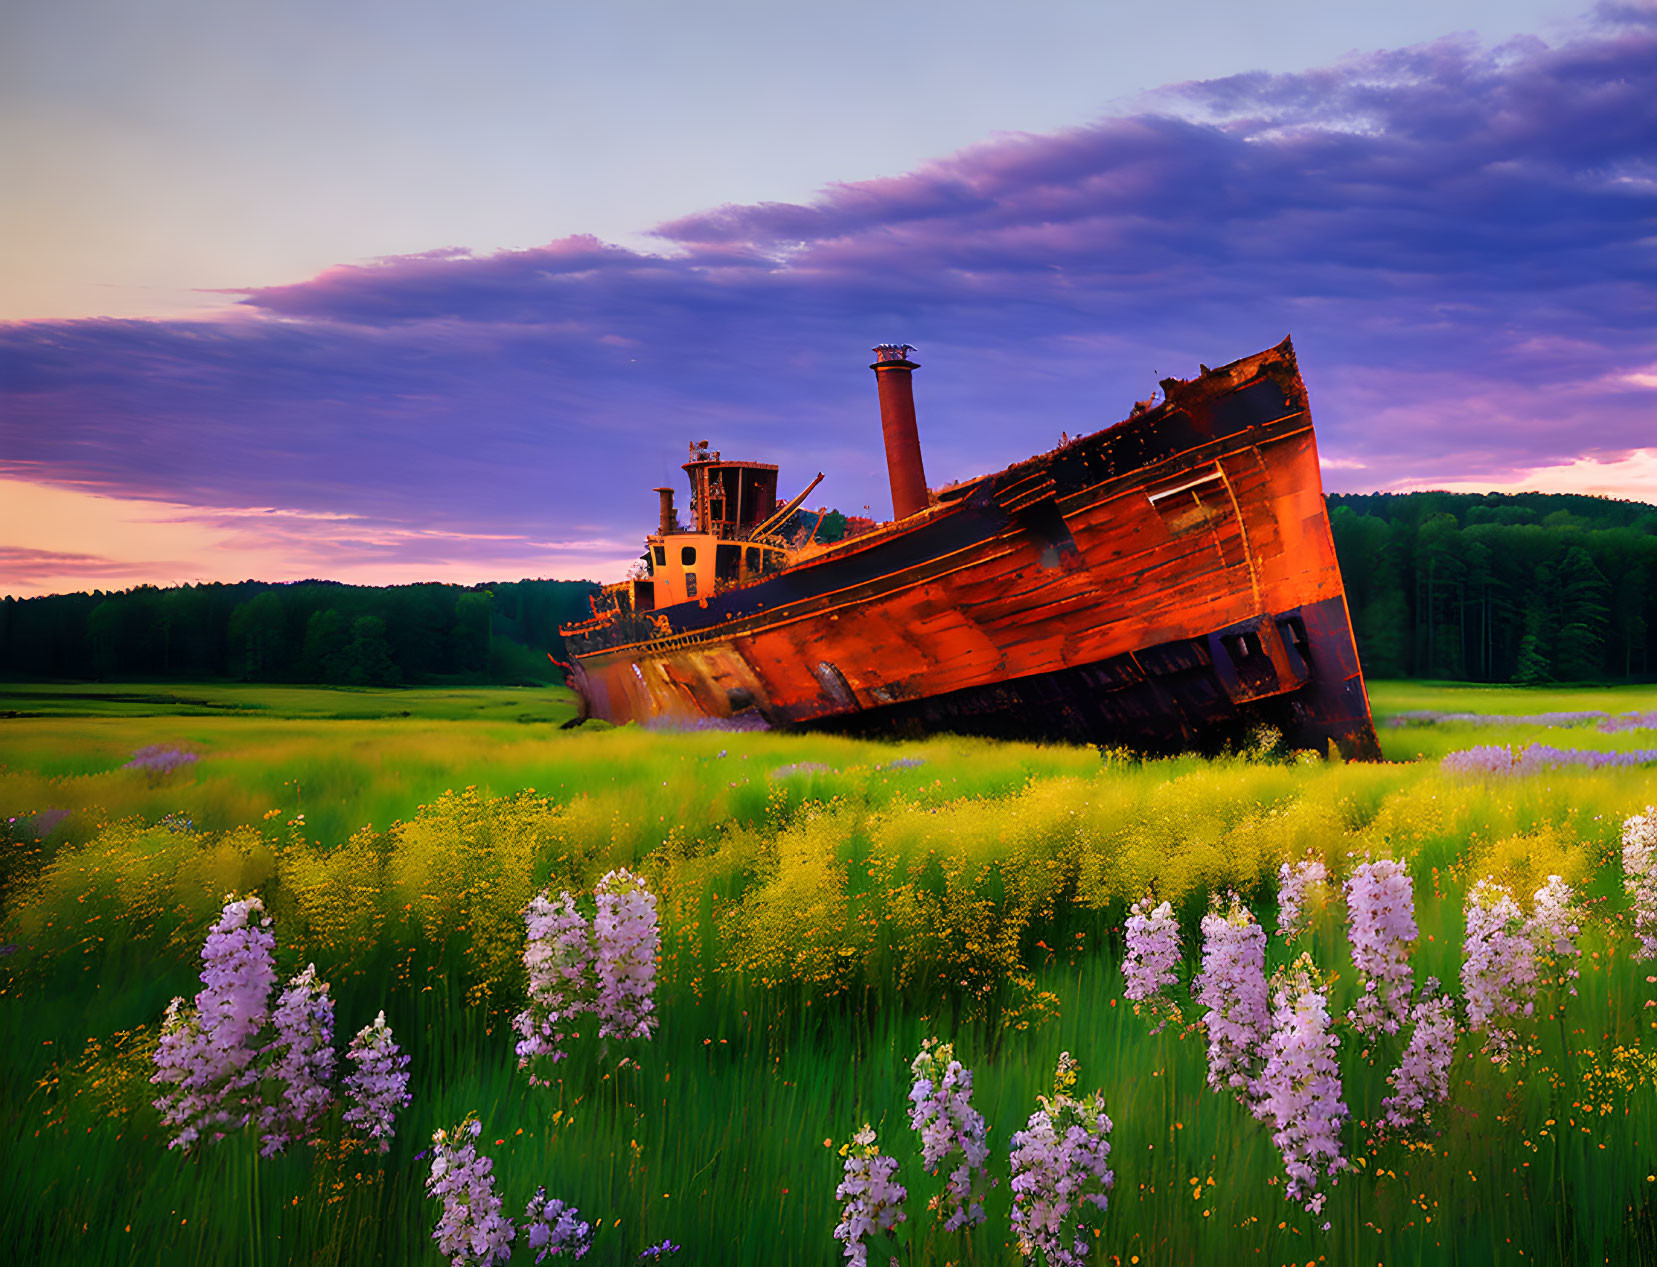 Abandoned shipwreck surrounded by purple flowers at sunset